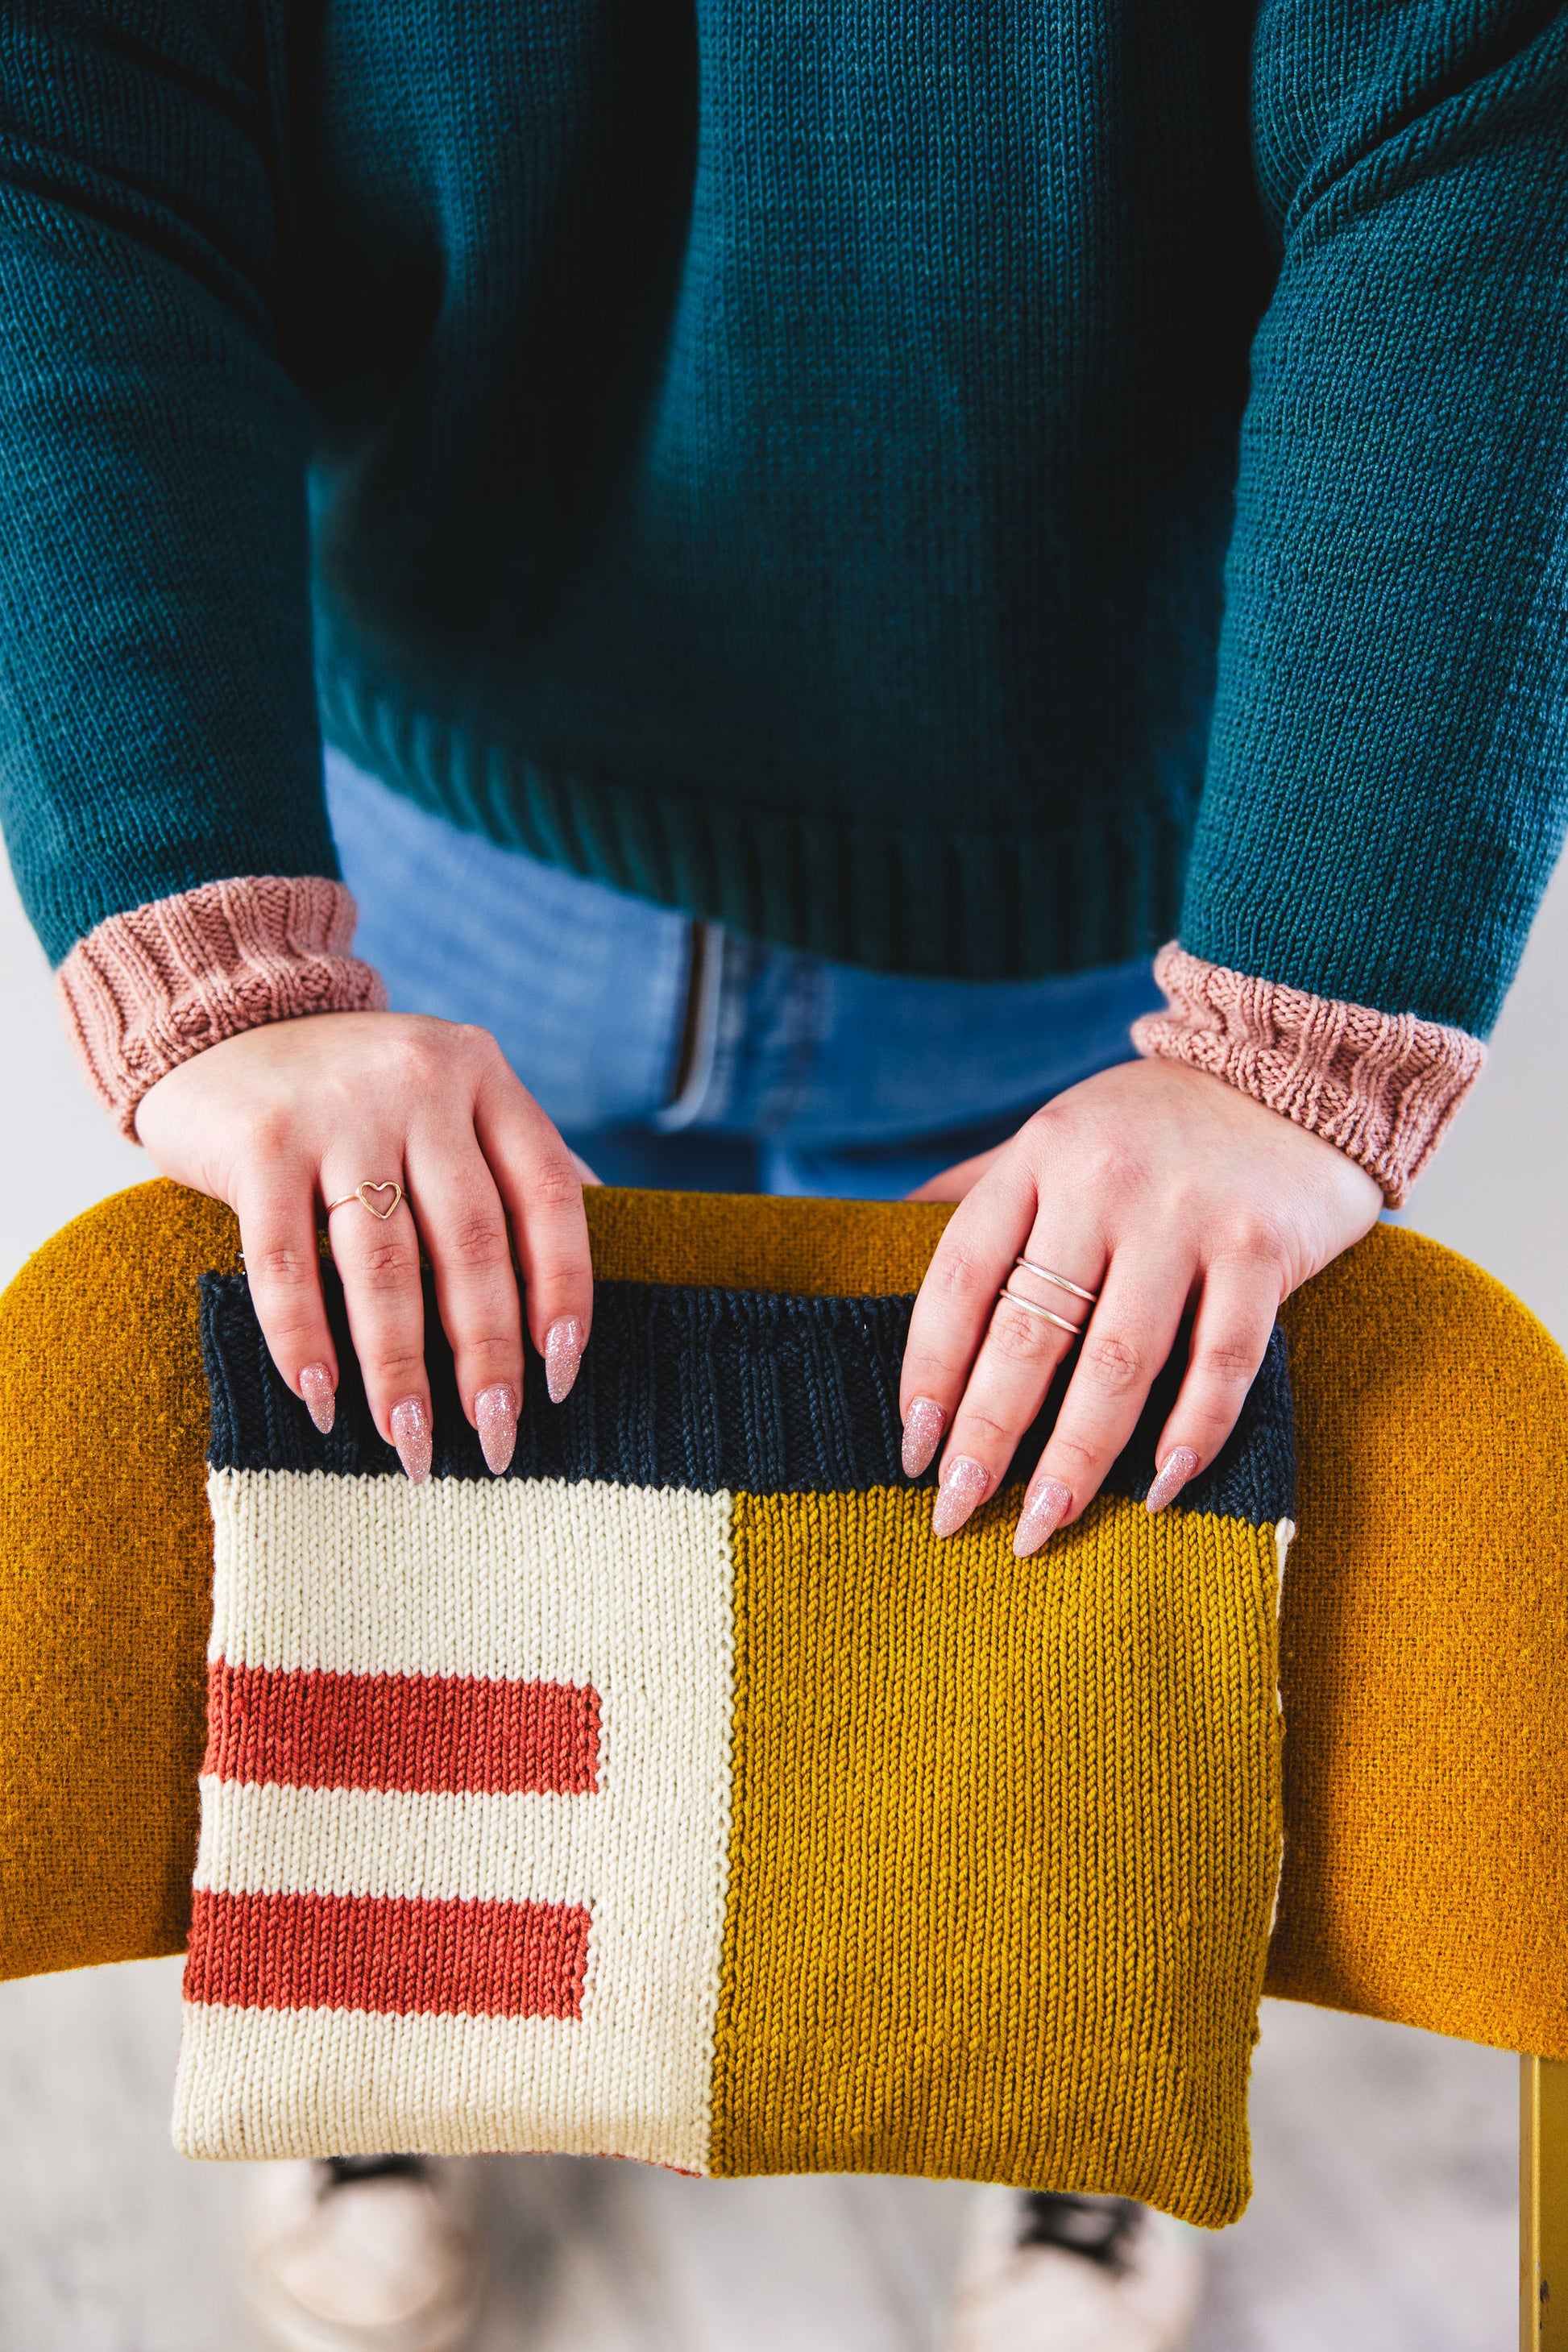 Courtney, who wears a green pullover with pink cuffs knit from the Study Group pattern, is seen from the torso down. She holds a knit pouch, the Case Study pouch. The pouch has a white, red, yellow, and blue colourblock design, created using intarsia techniques.